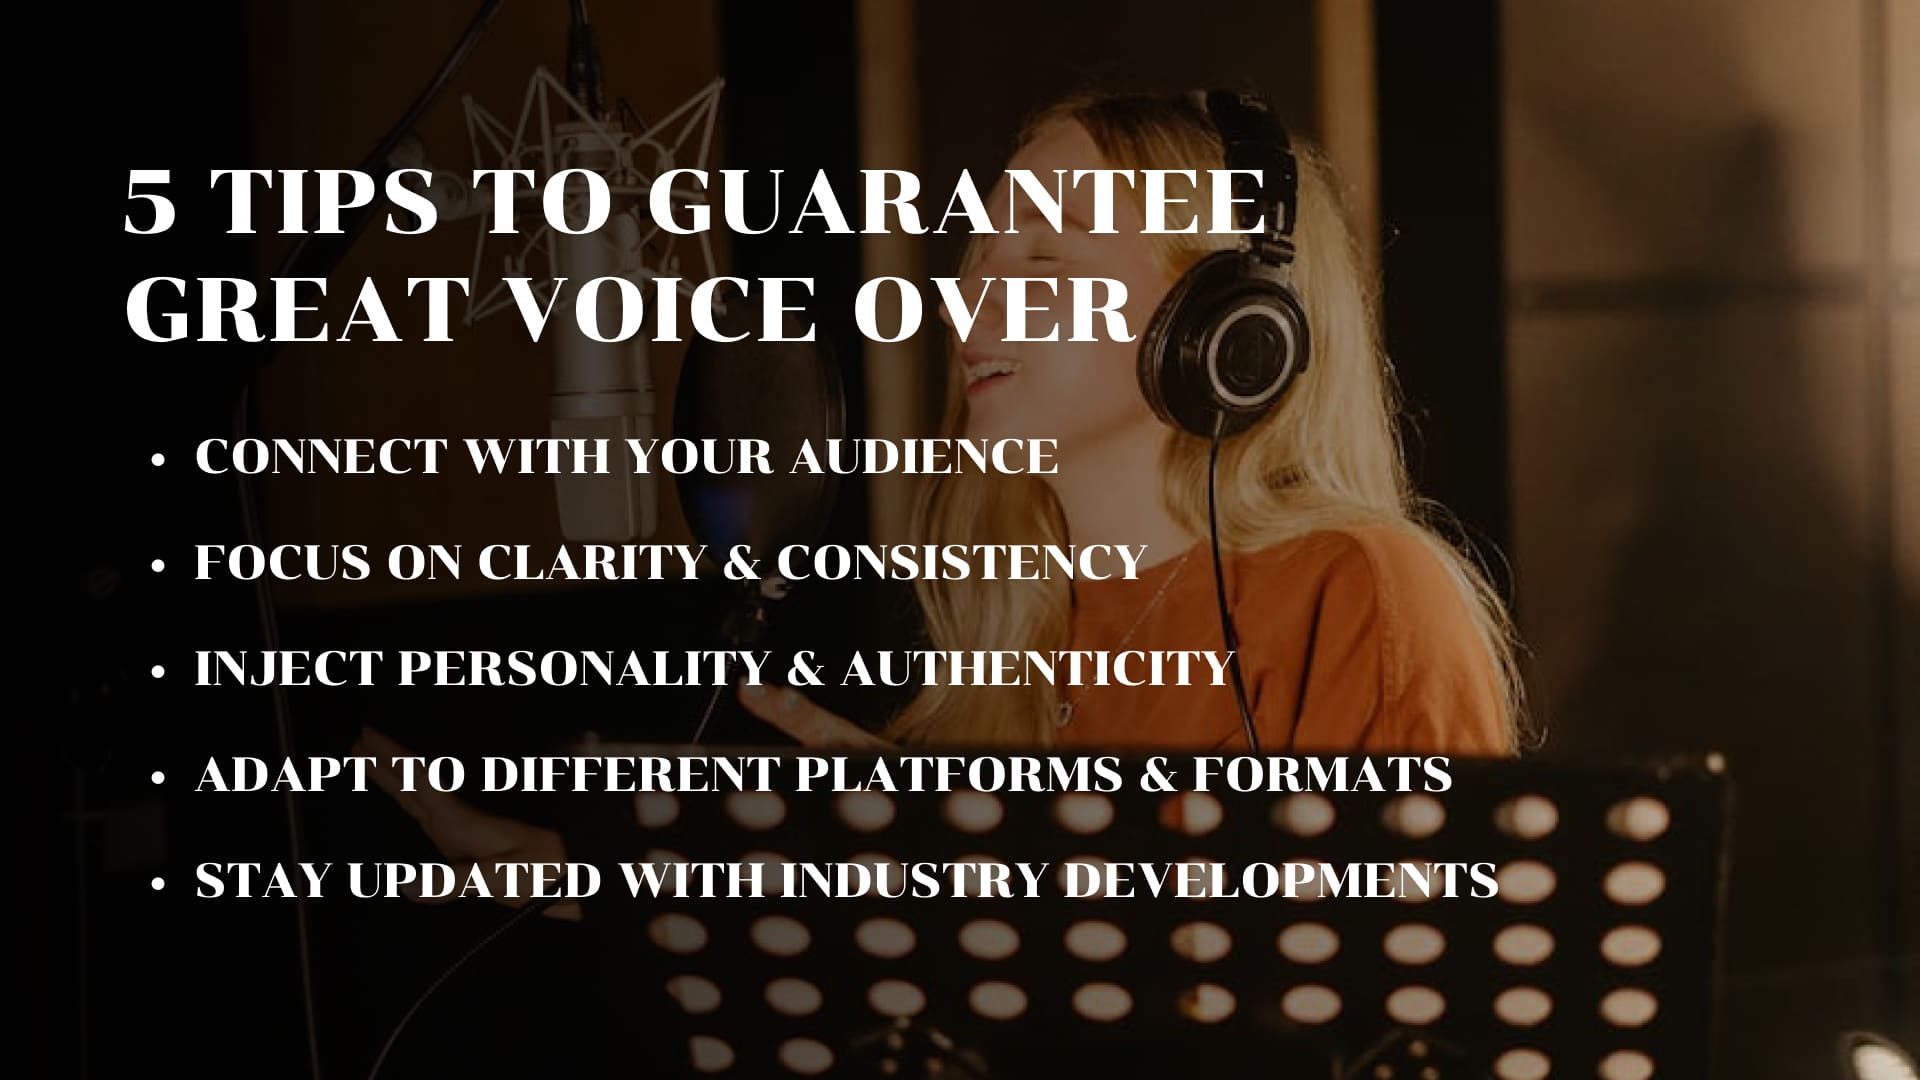 5 Tips to Guarantee Great Voice Over